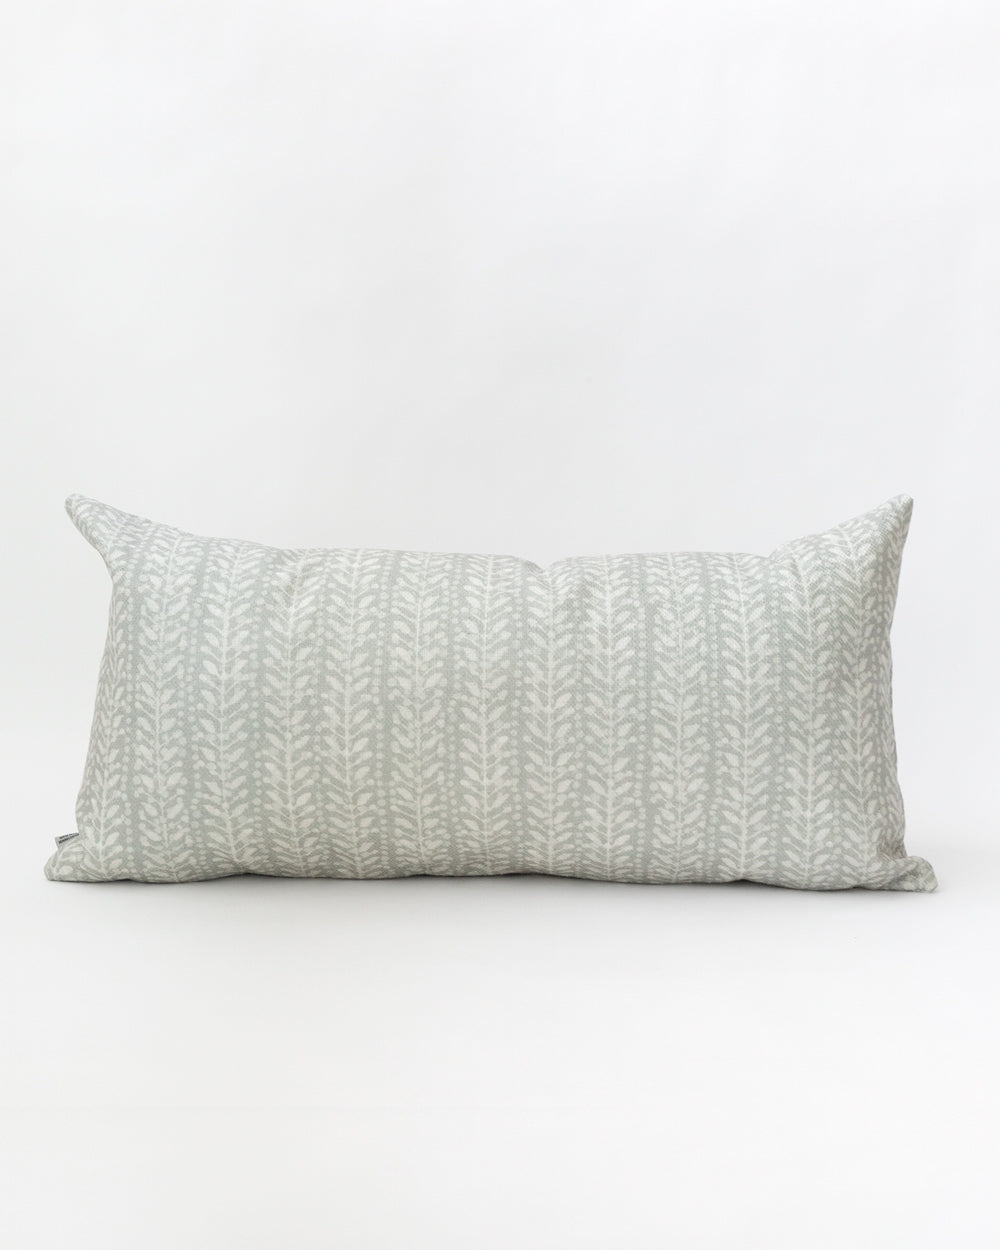 Rectangle pillow with a subtle white floral/vine stripe on a misty grey-blue background